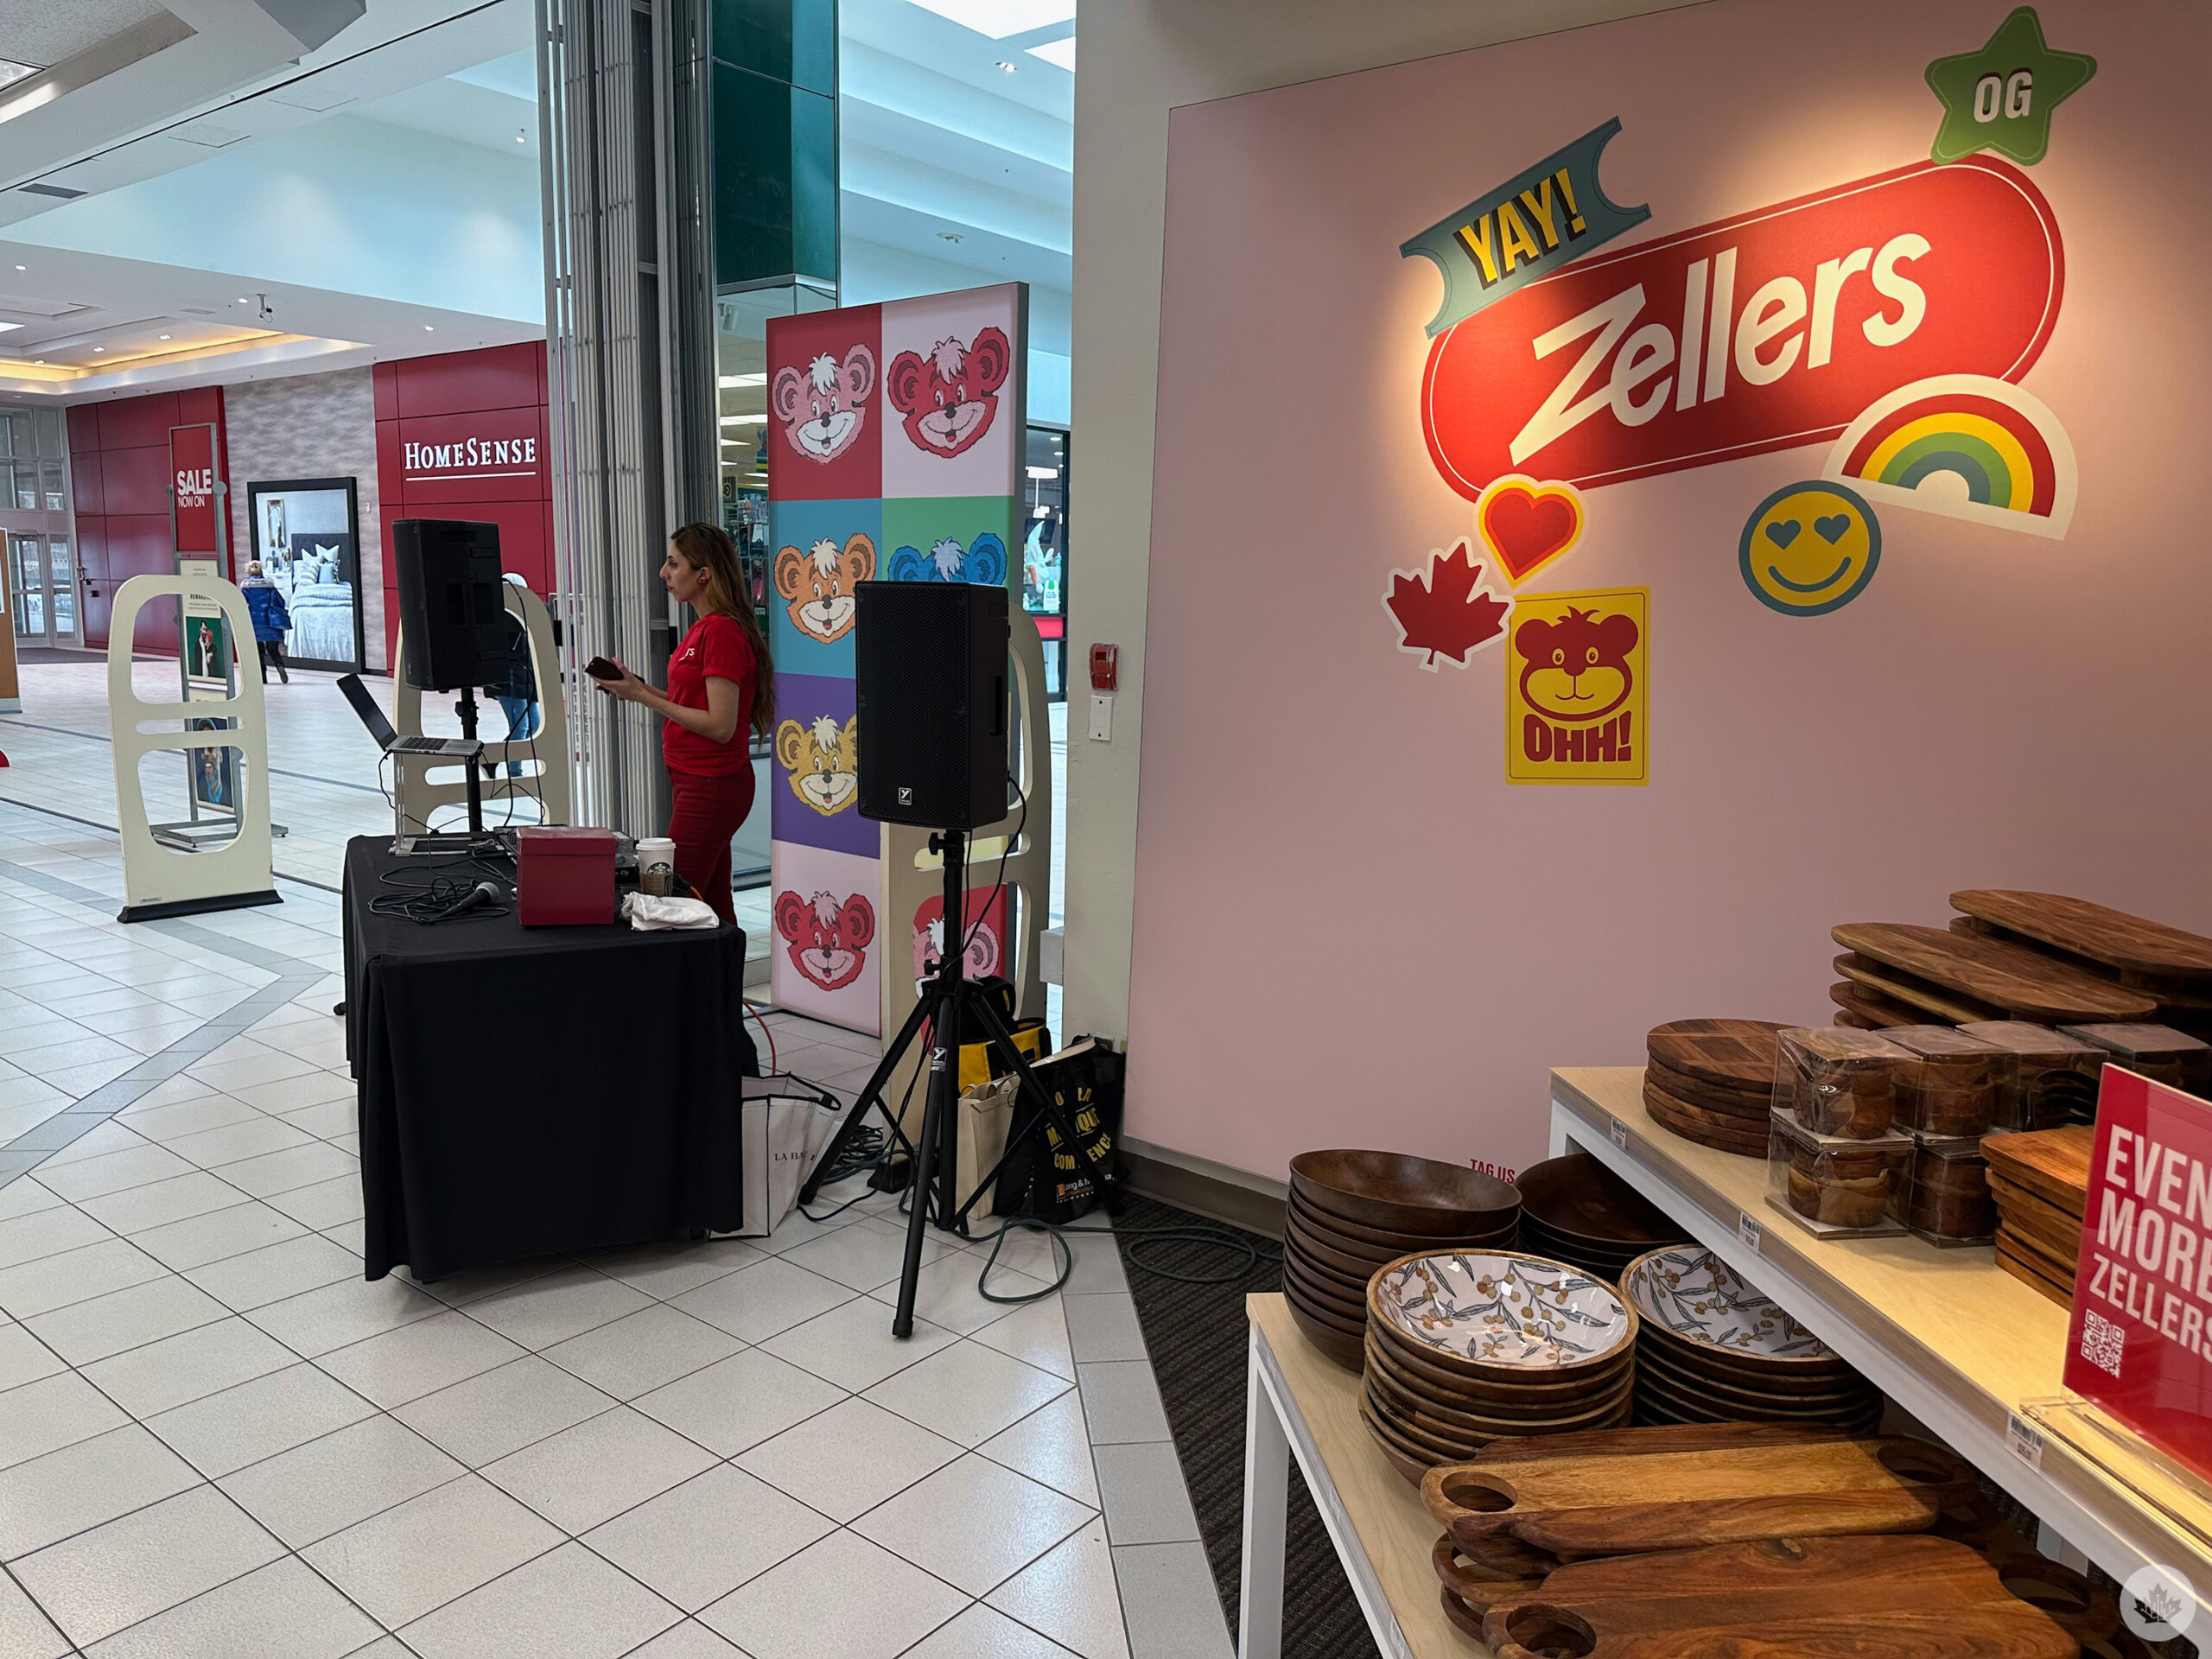 zellers is back and surprisingly doesn’t totally suck